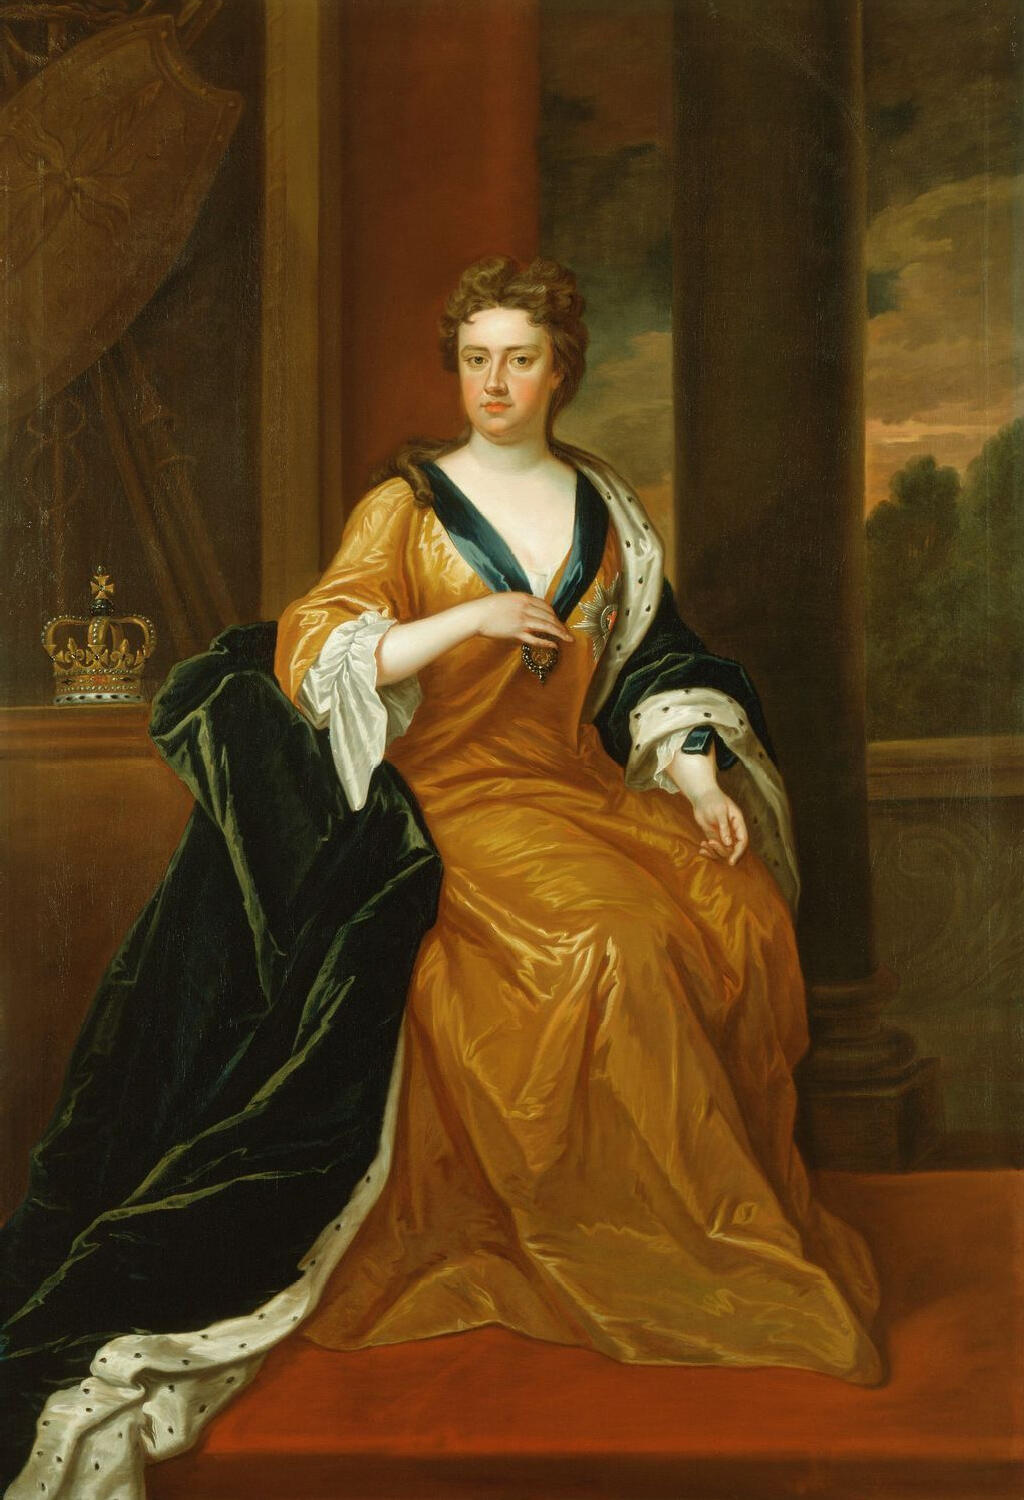 Oil painting of Queen Anne of Great Britain, by Charles Jervas, between 1702 and 1714